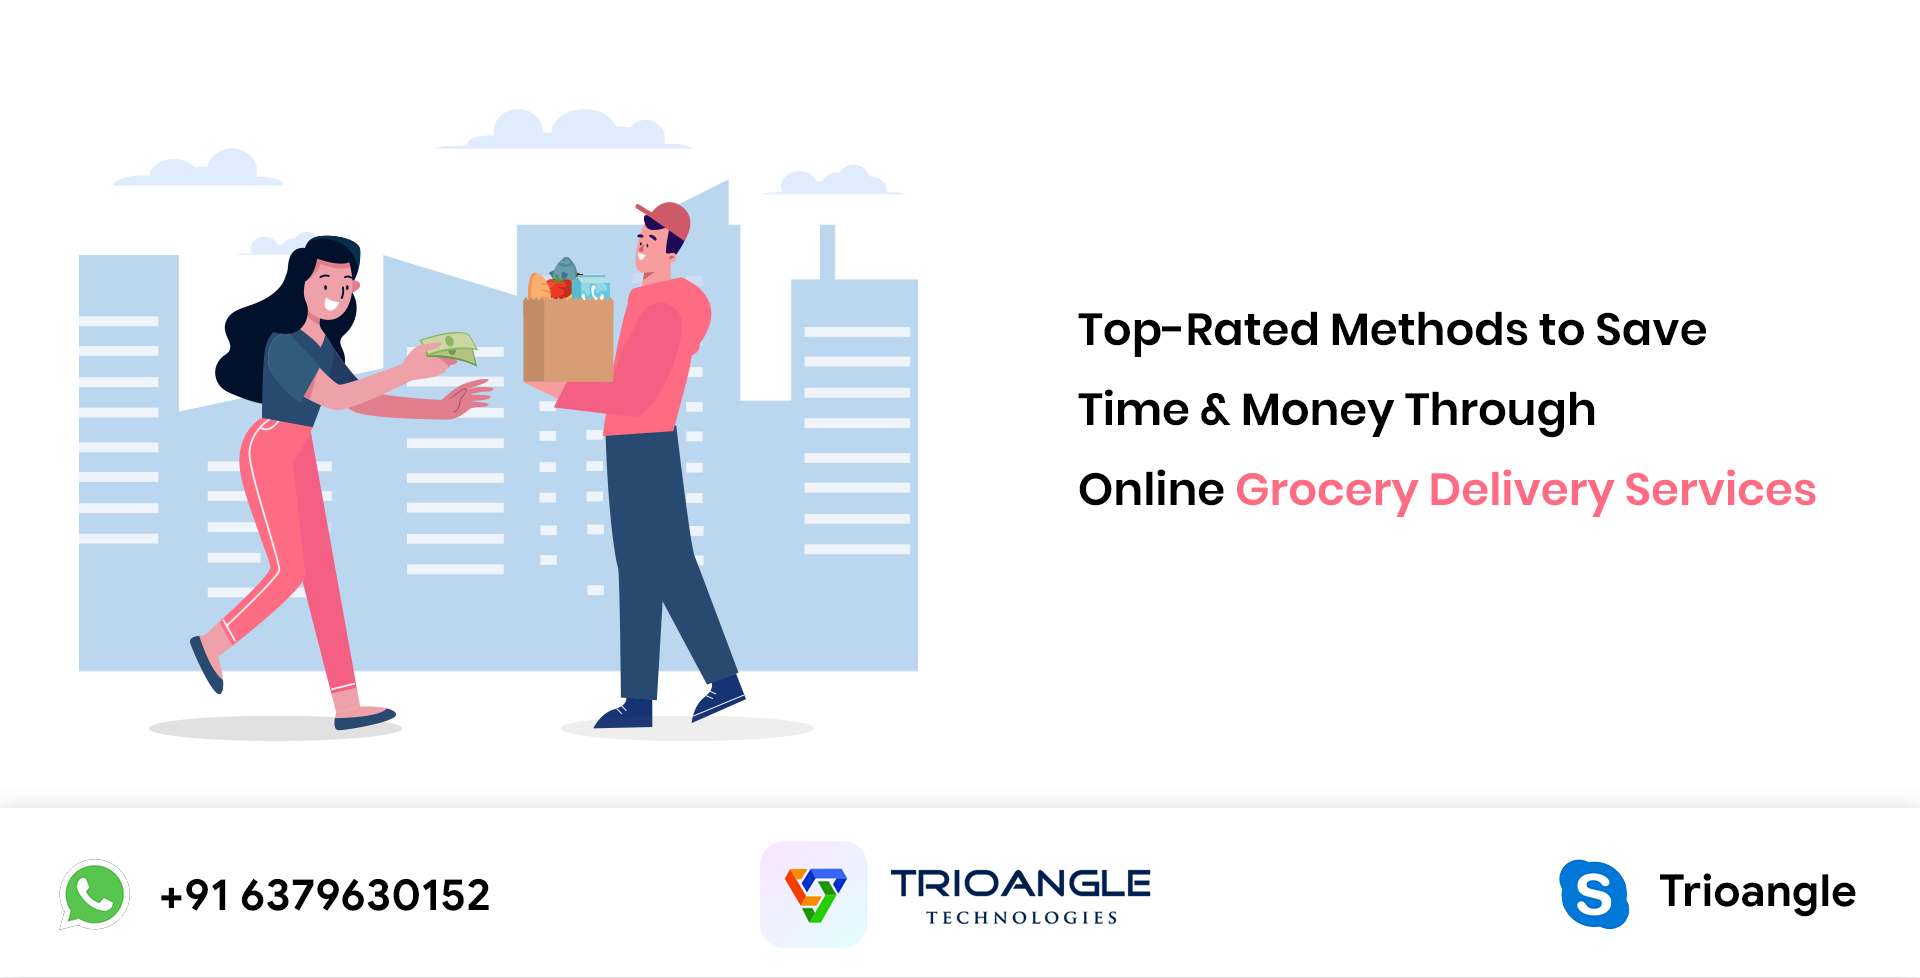 Top-Rated Methods to Save Time & Money Through Online Grocery Shopping